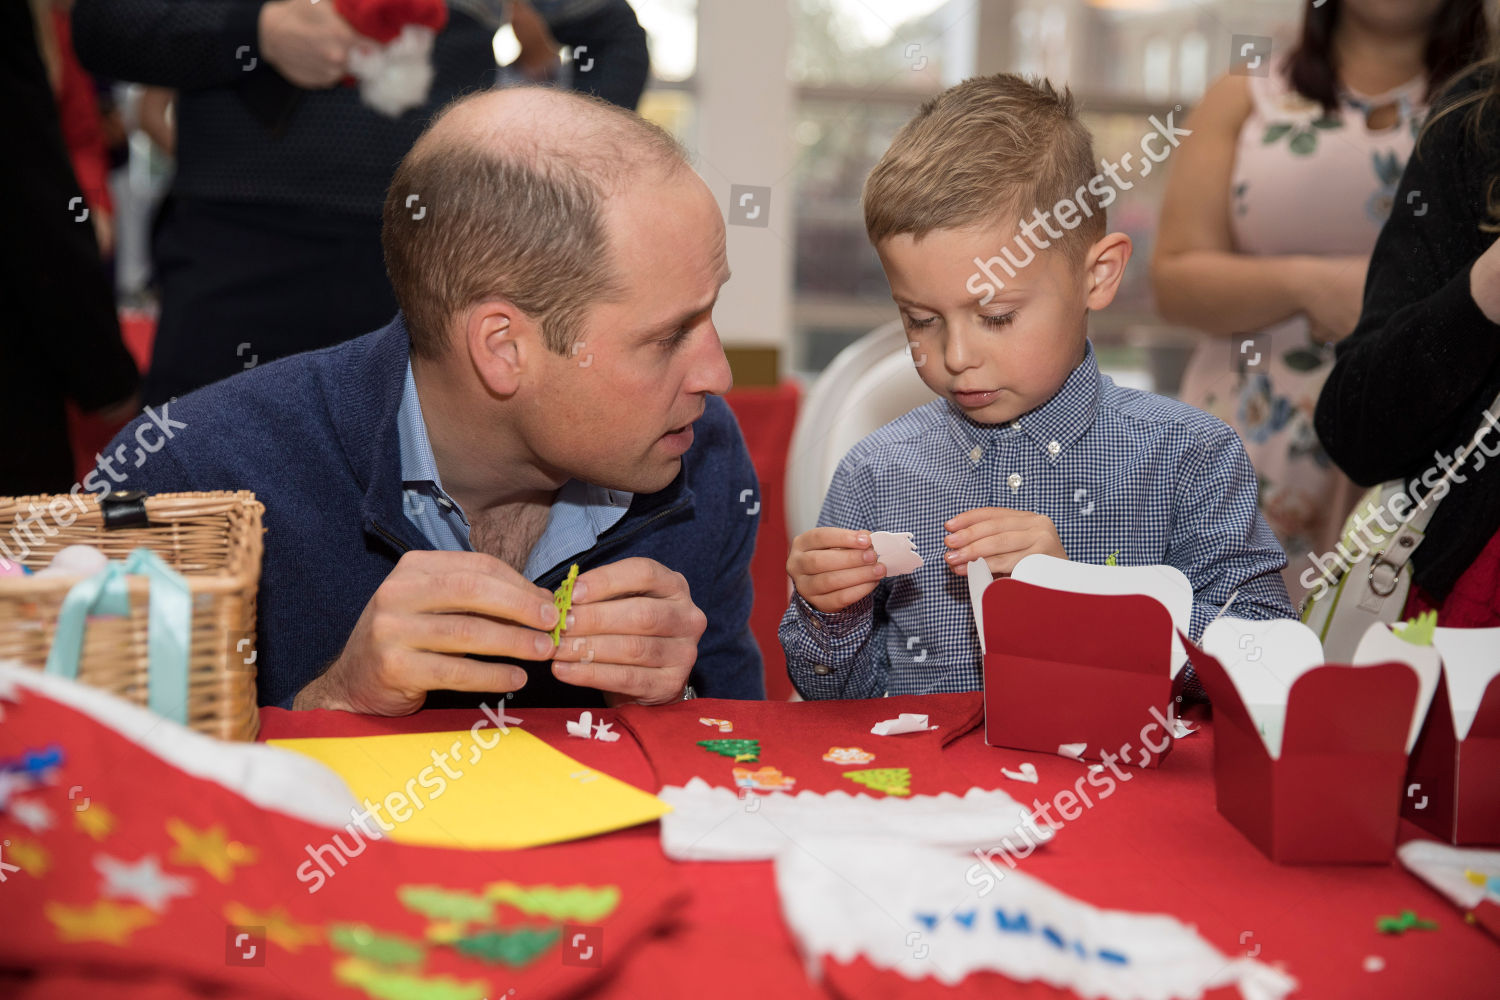 prince-william-and-catherine-duchess-of-cambridge-host-lunch-for-military-personnel-london-uk-shutterstock-editorial-10013607b.jpg